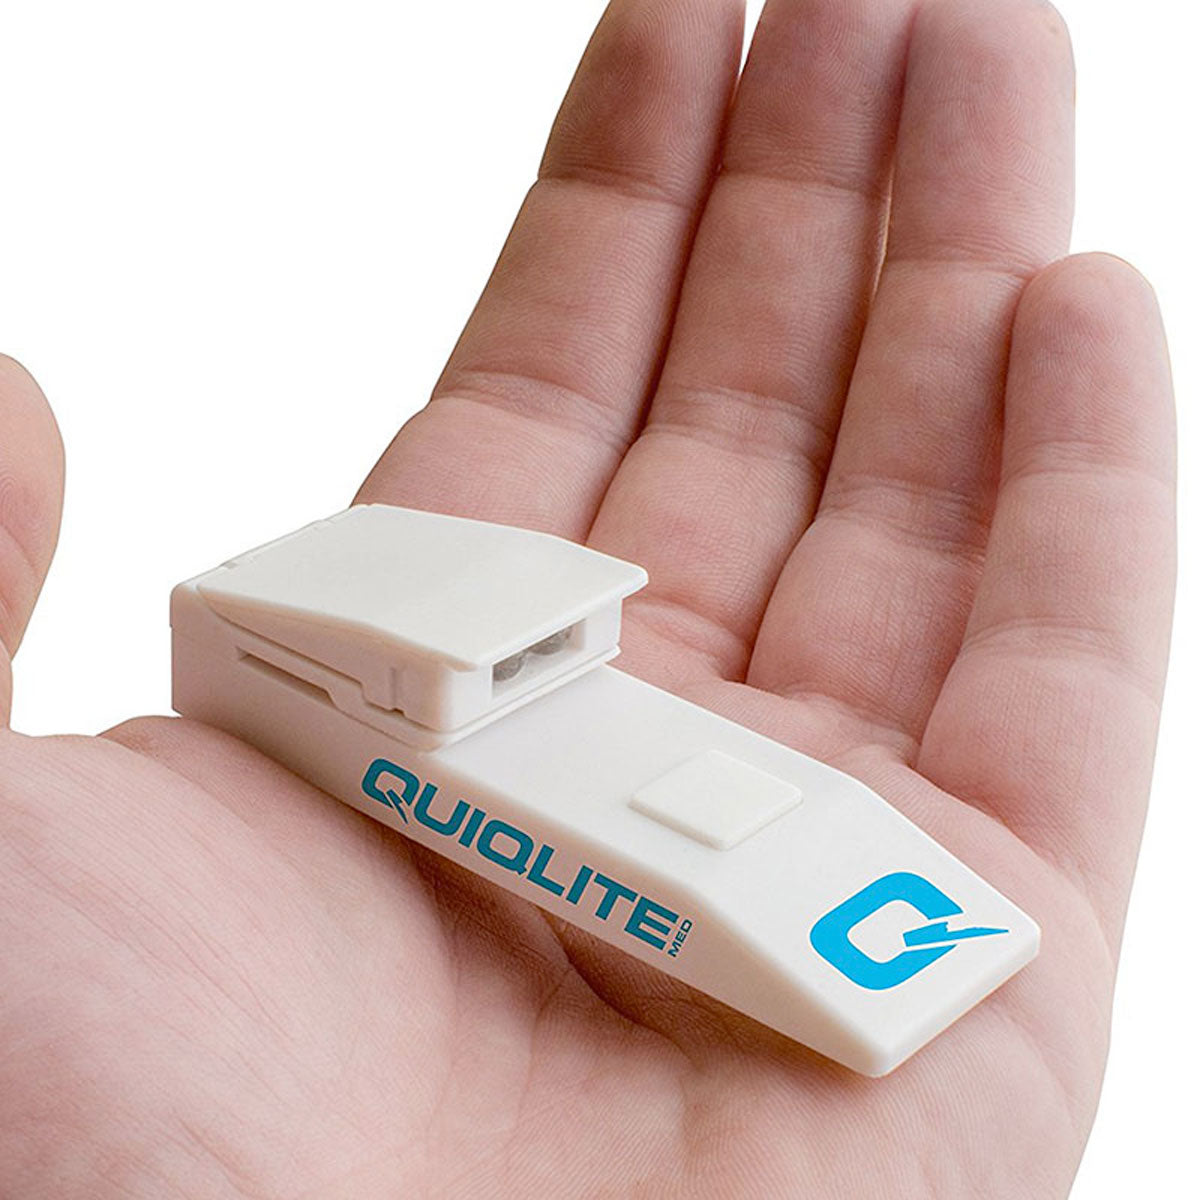 QuiqliteMed Hands Free LED Light with Pupil Gauge Flashlights and Lighting Quiqlite Tactical Gear Supplier Tactical Distributors Australia